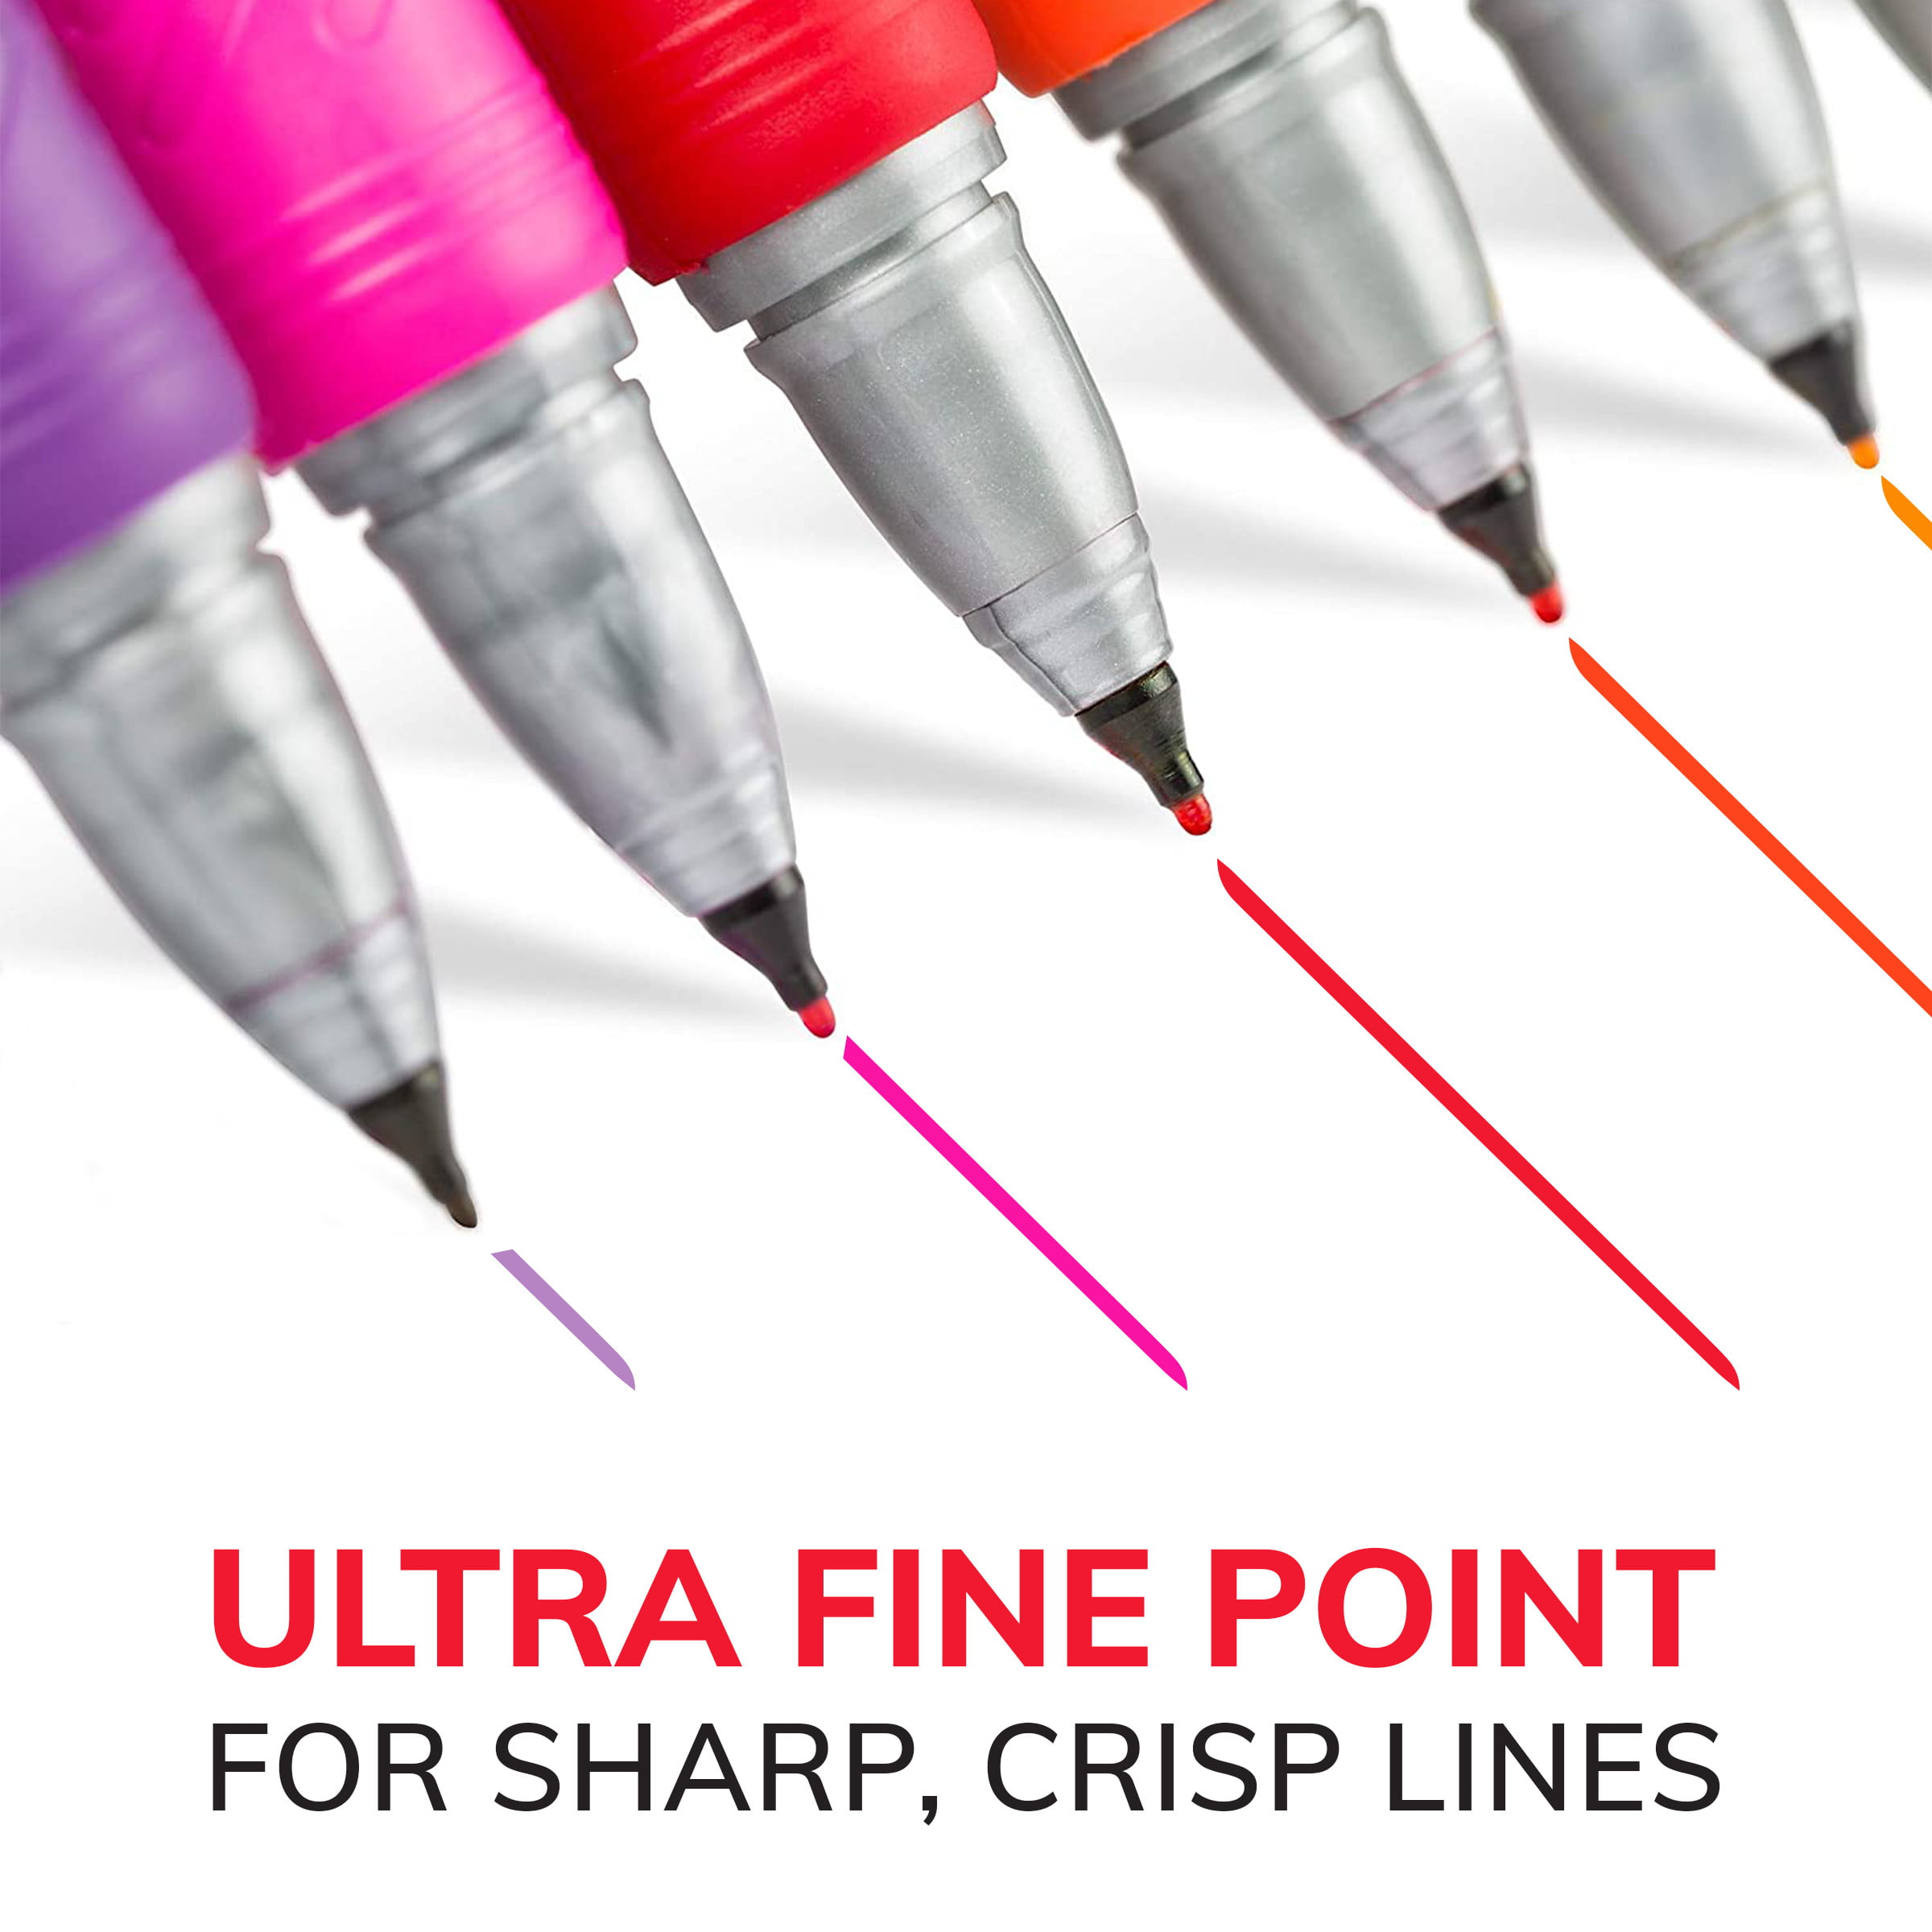 BIC® Intensity™ Fine-Point Permanent Markers, 8 pk - Fry's Food Stores